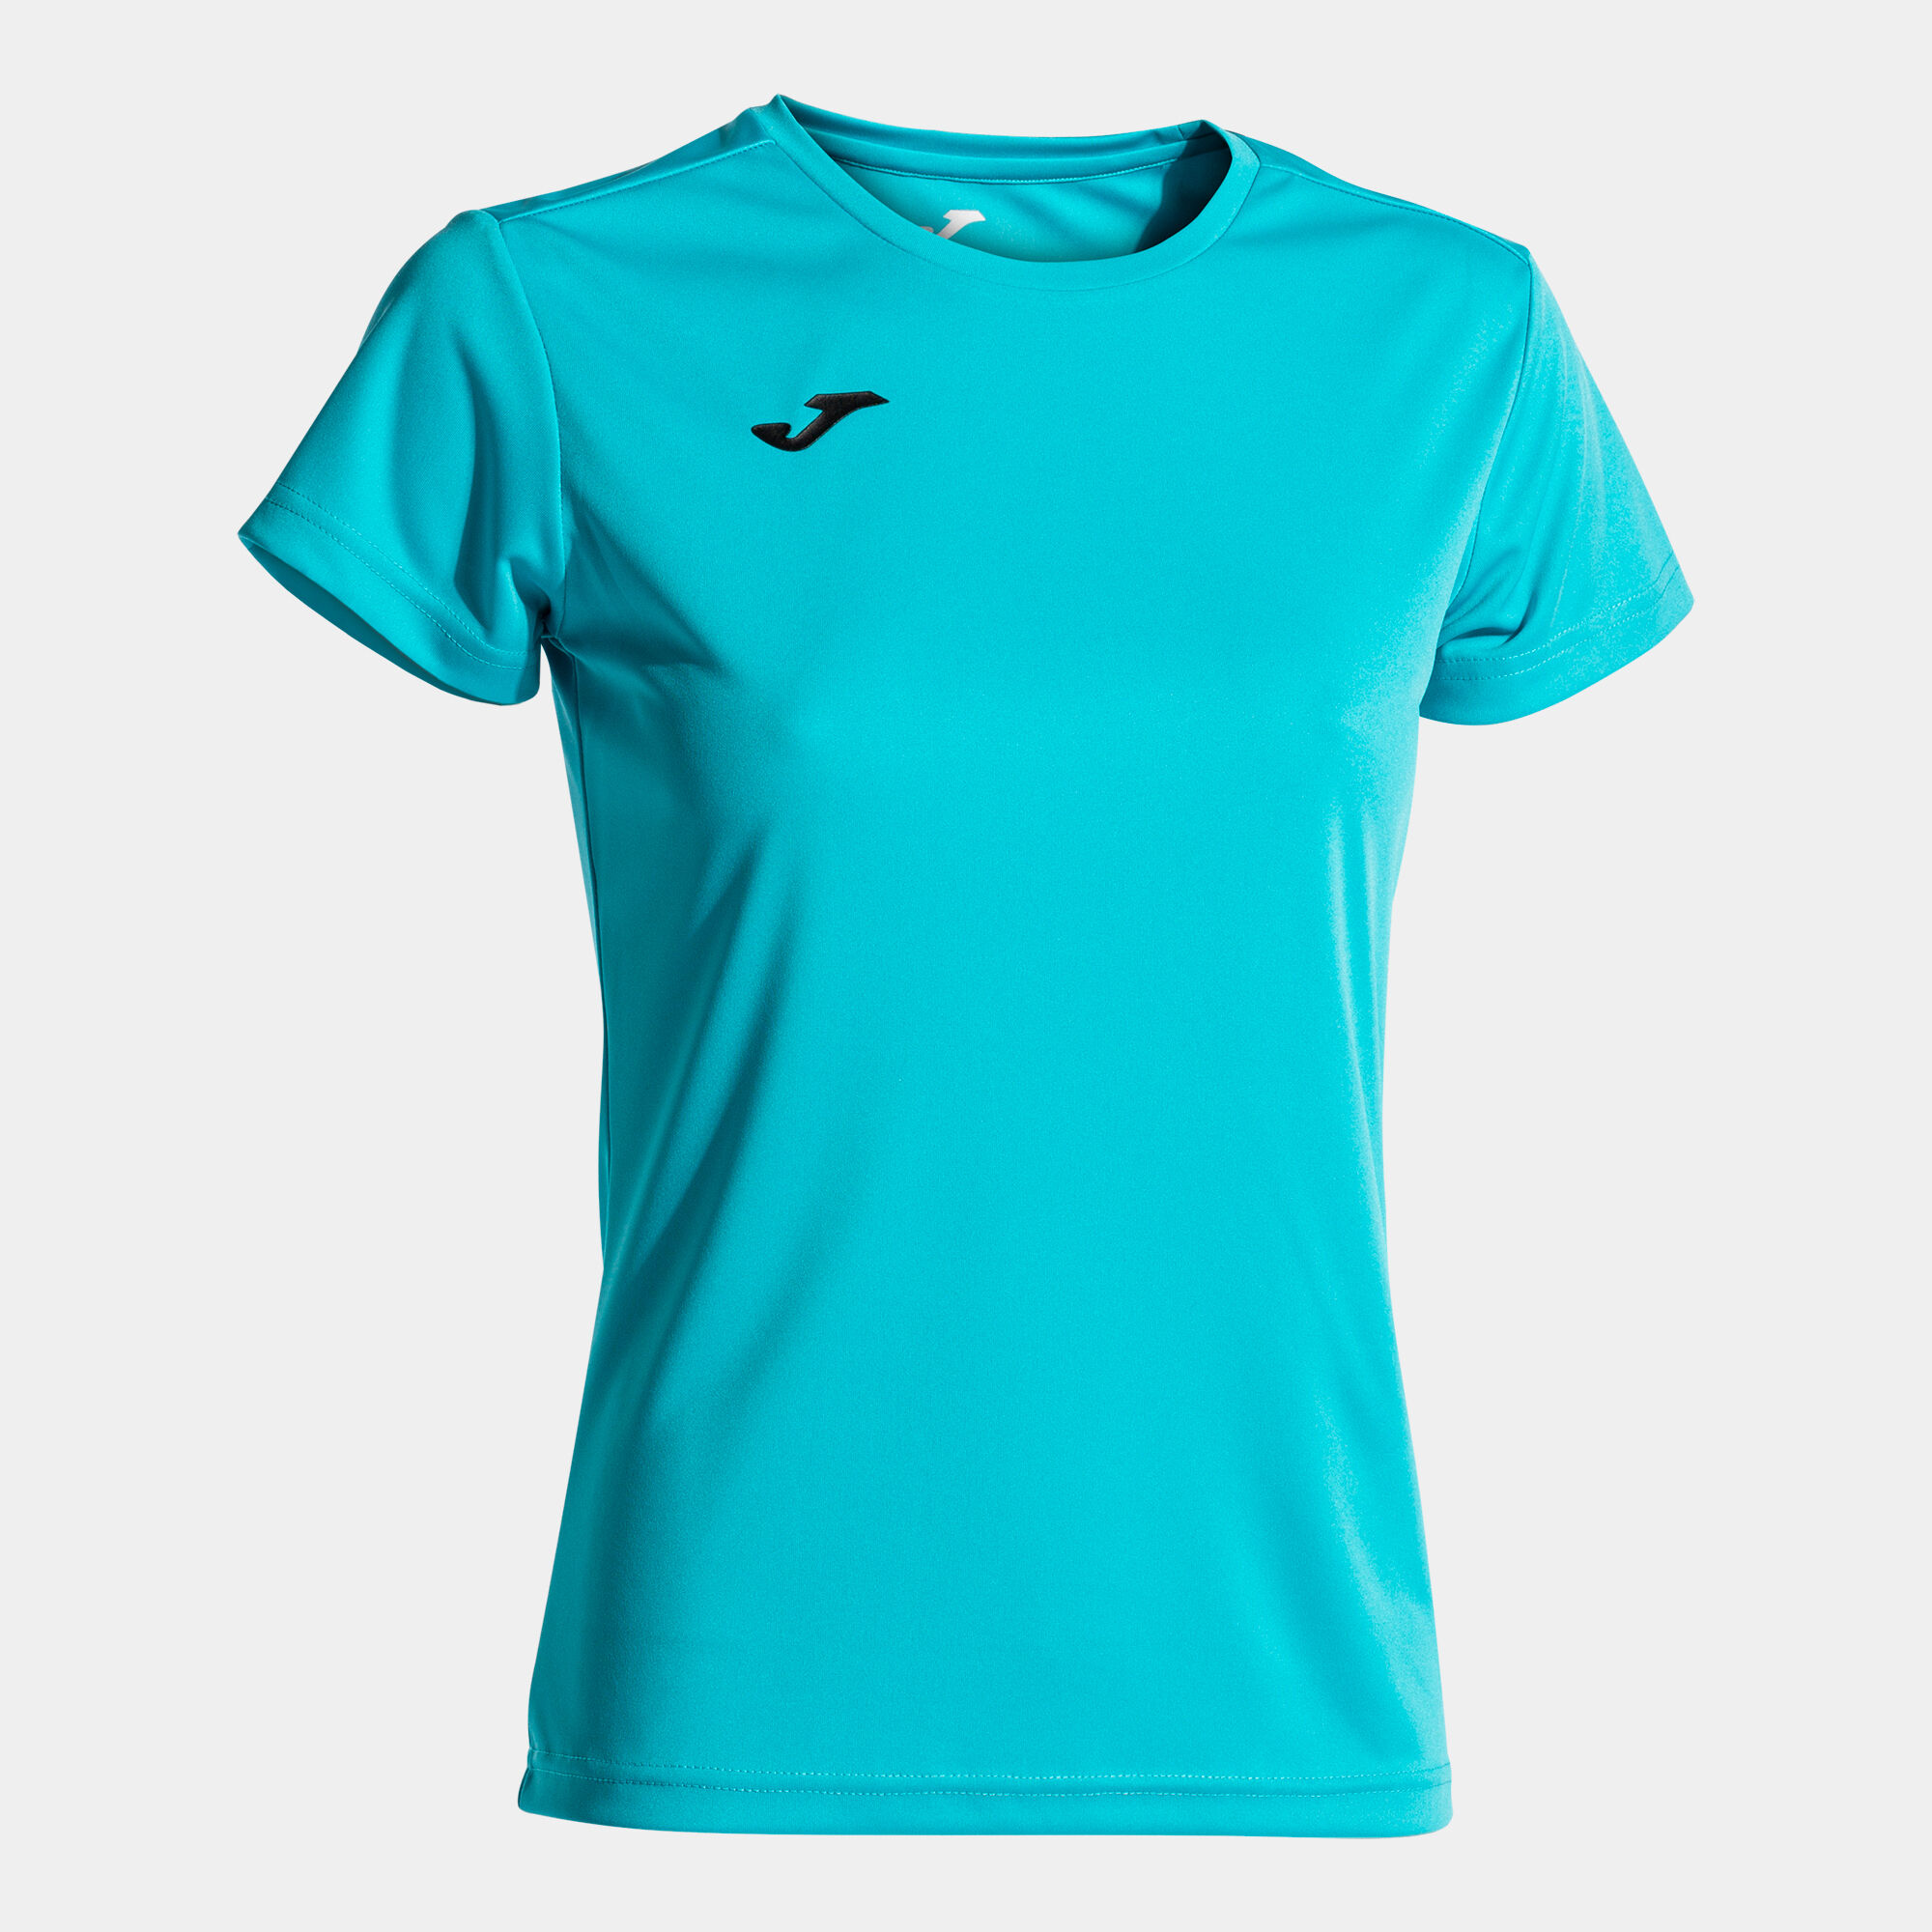 Maillot manches courtes femme Combi turquoise fluo